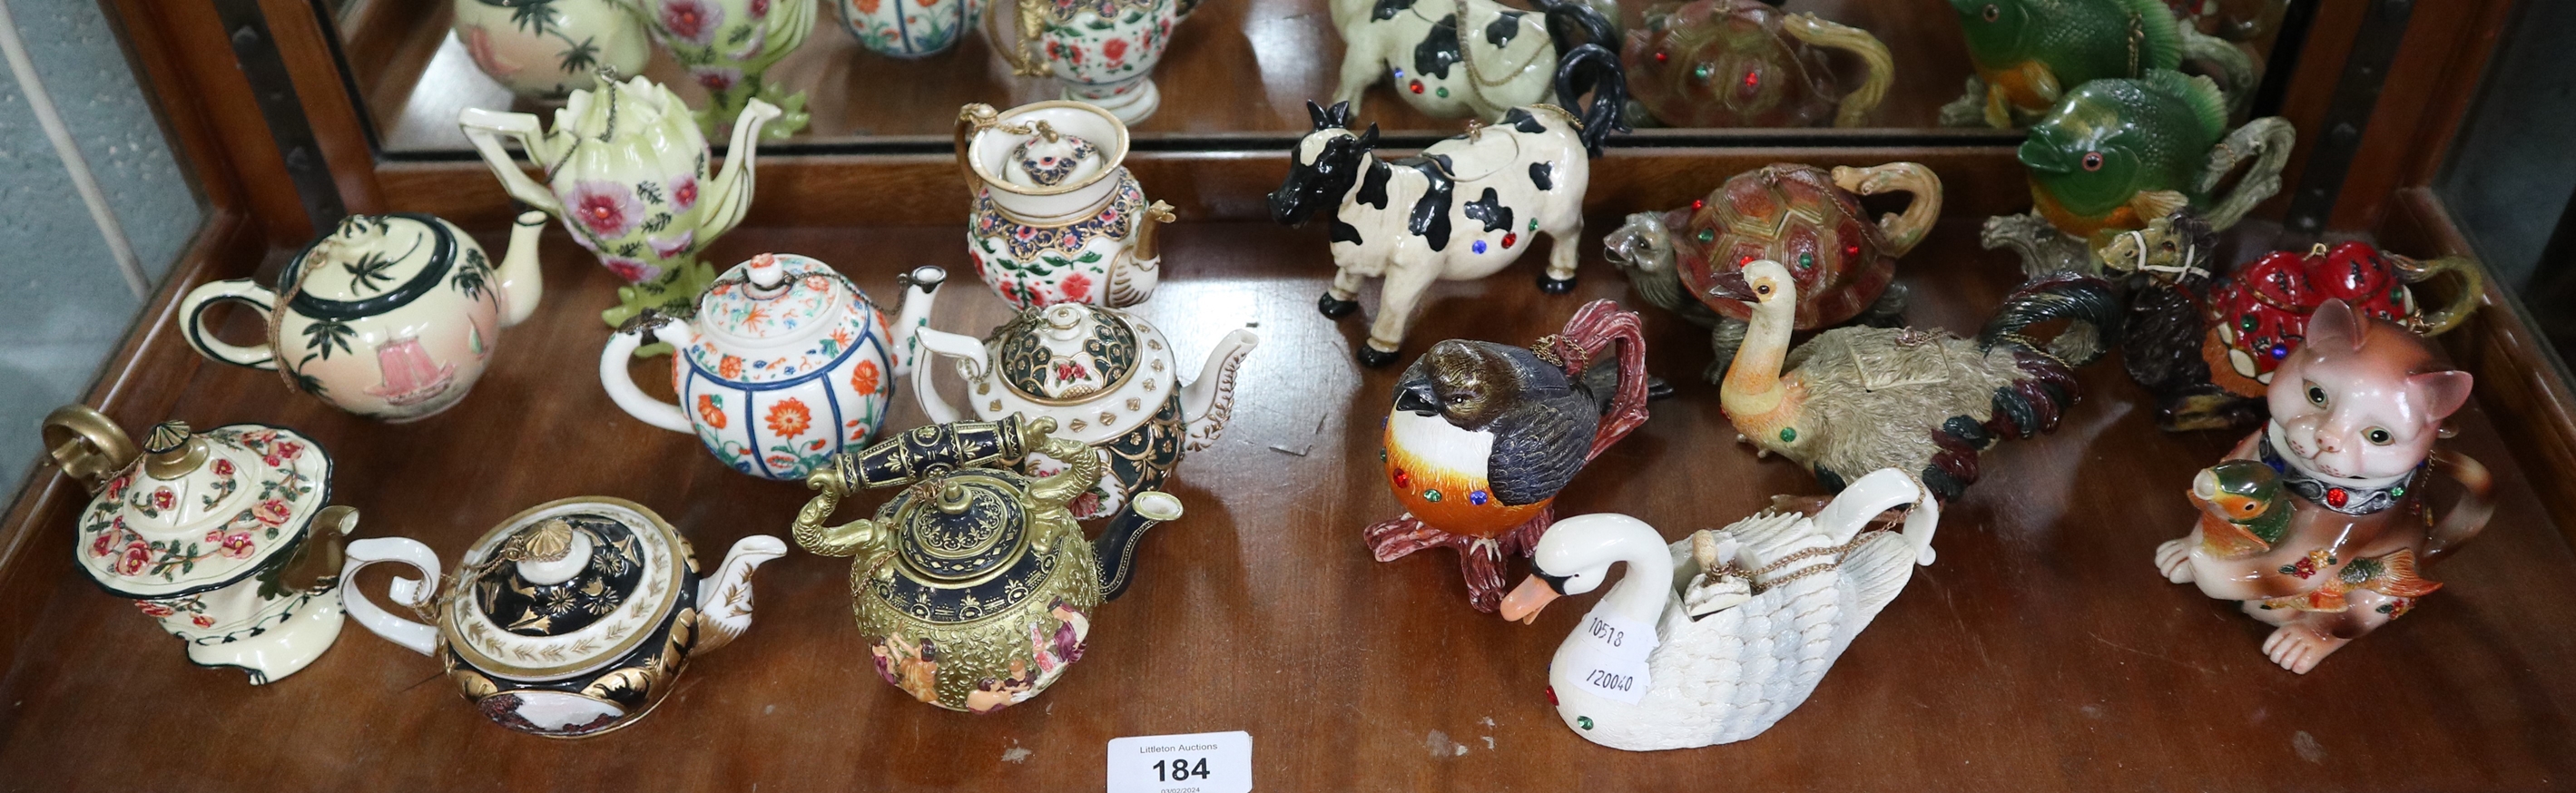 Collection of miniature animals and decorative teapots